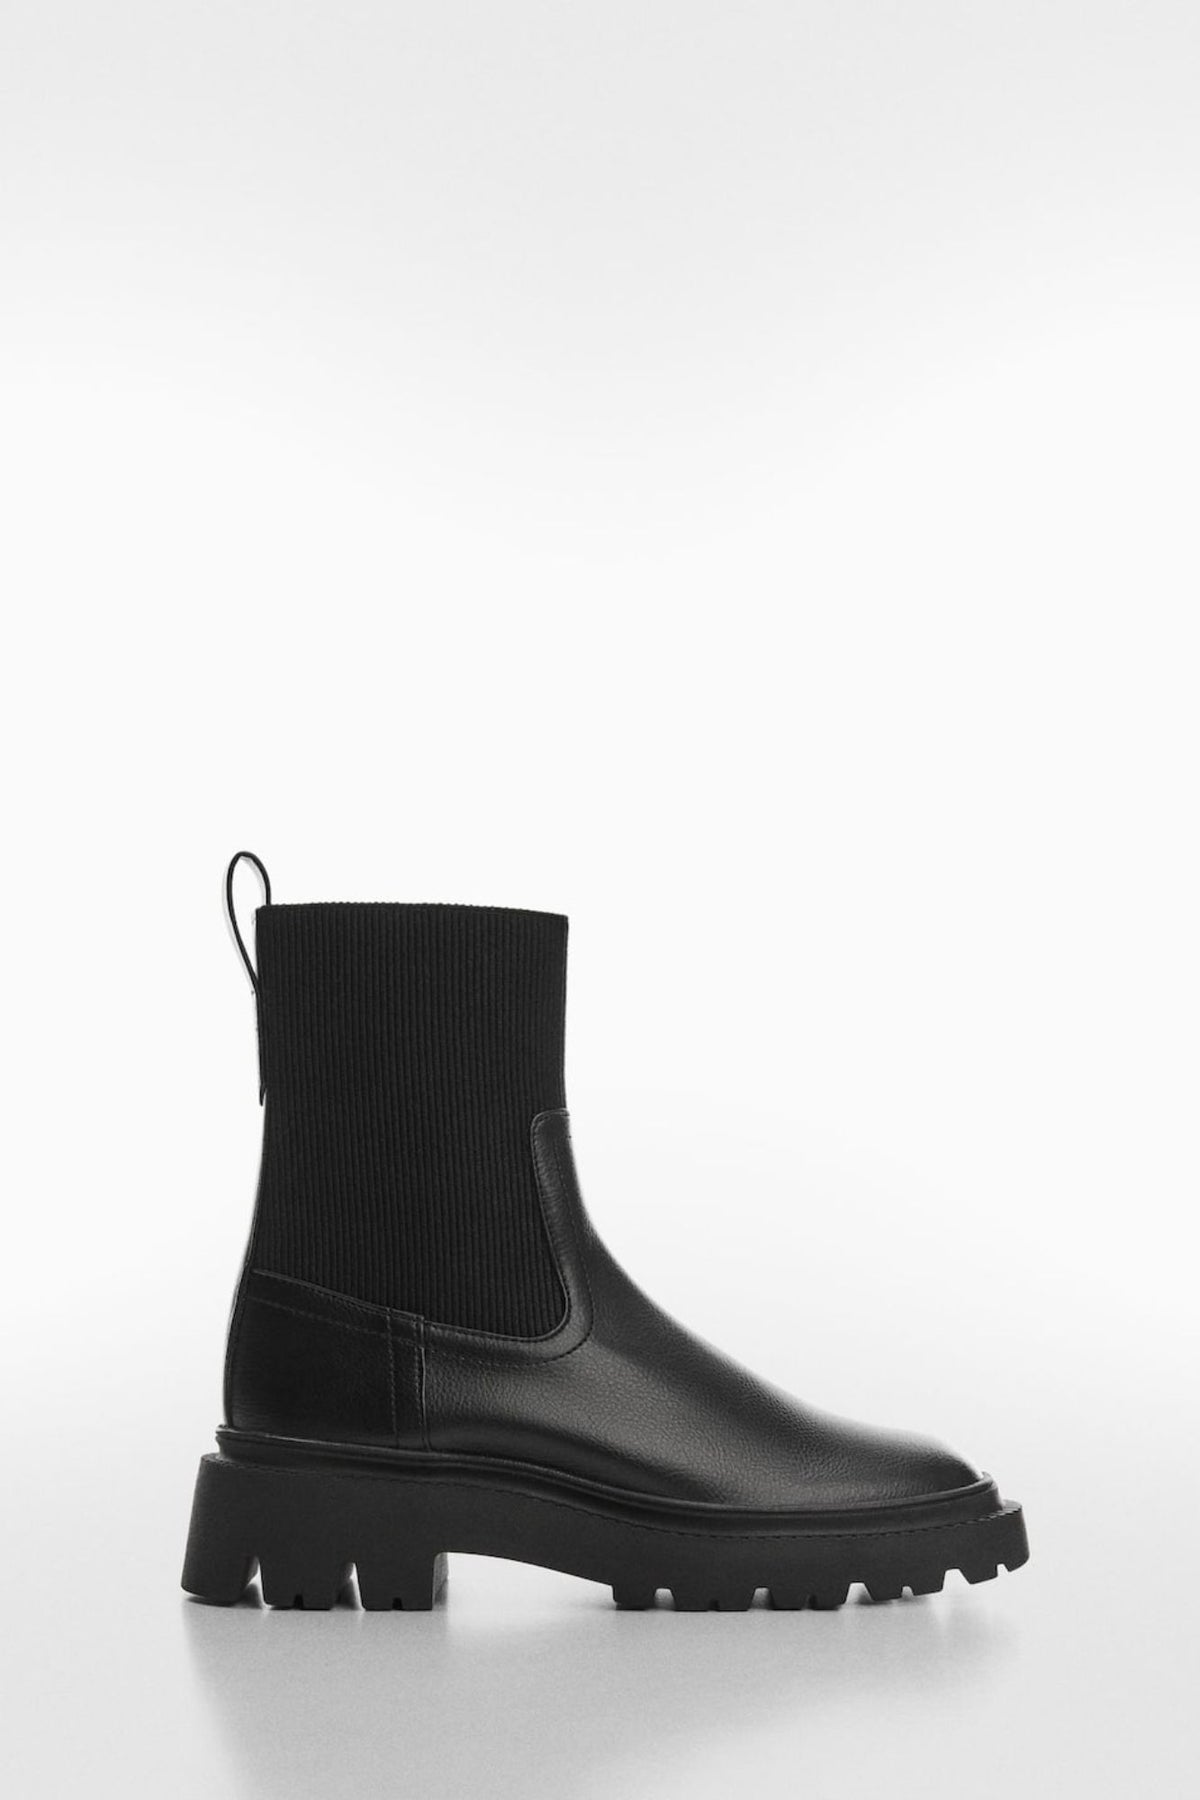 Track Platform Fitted Ankle Boots